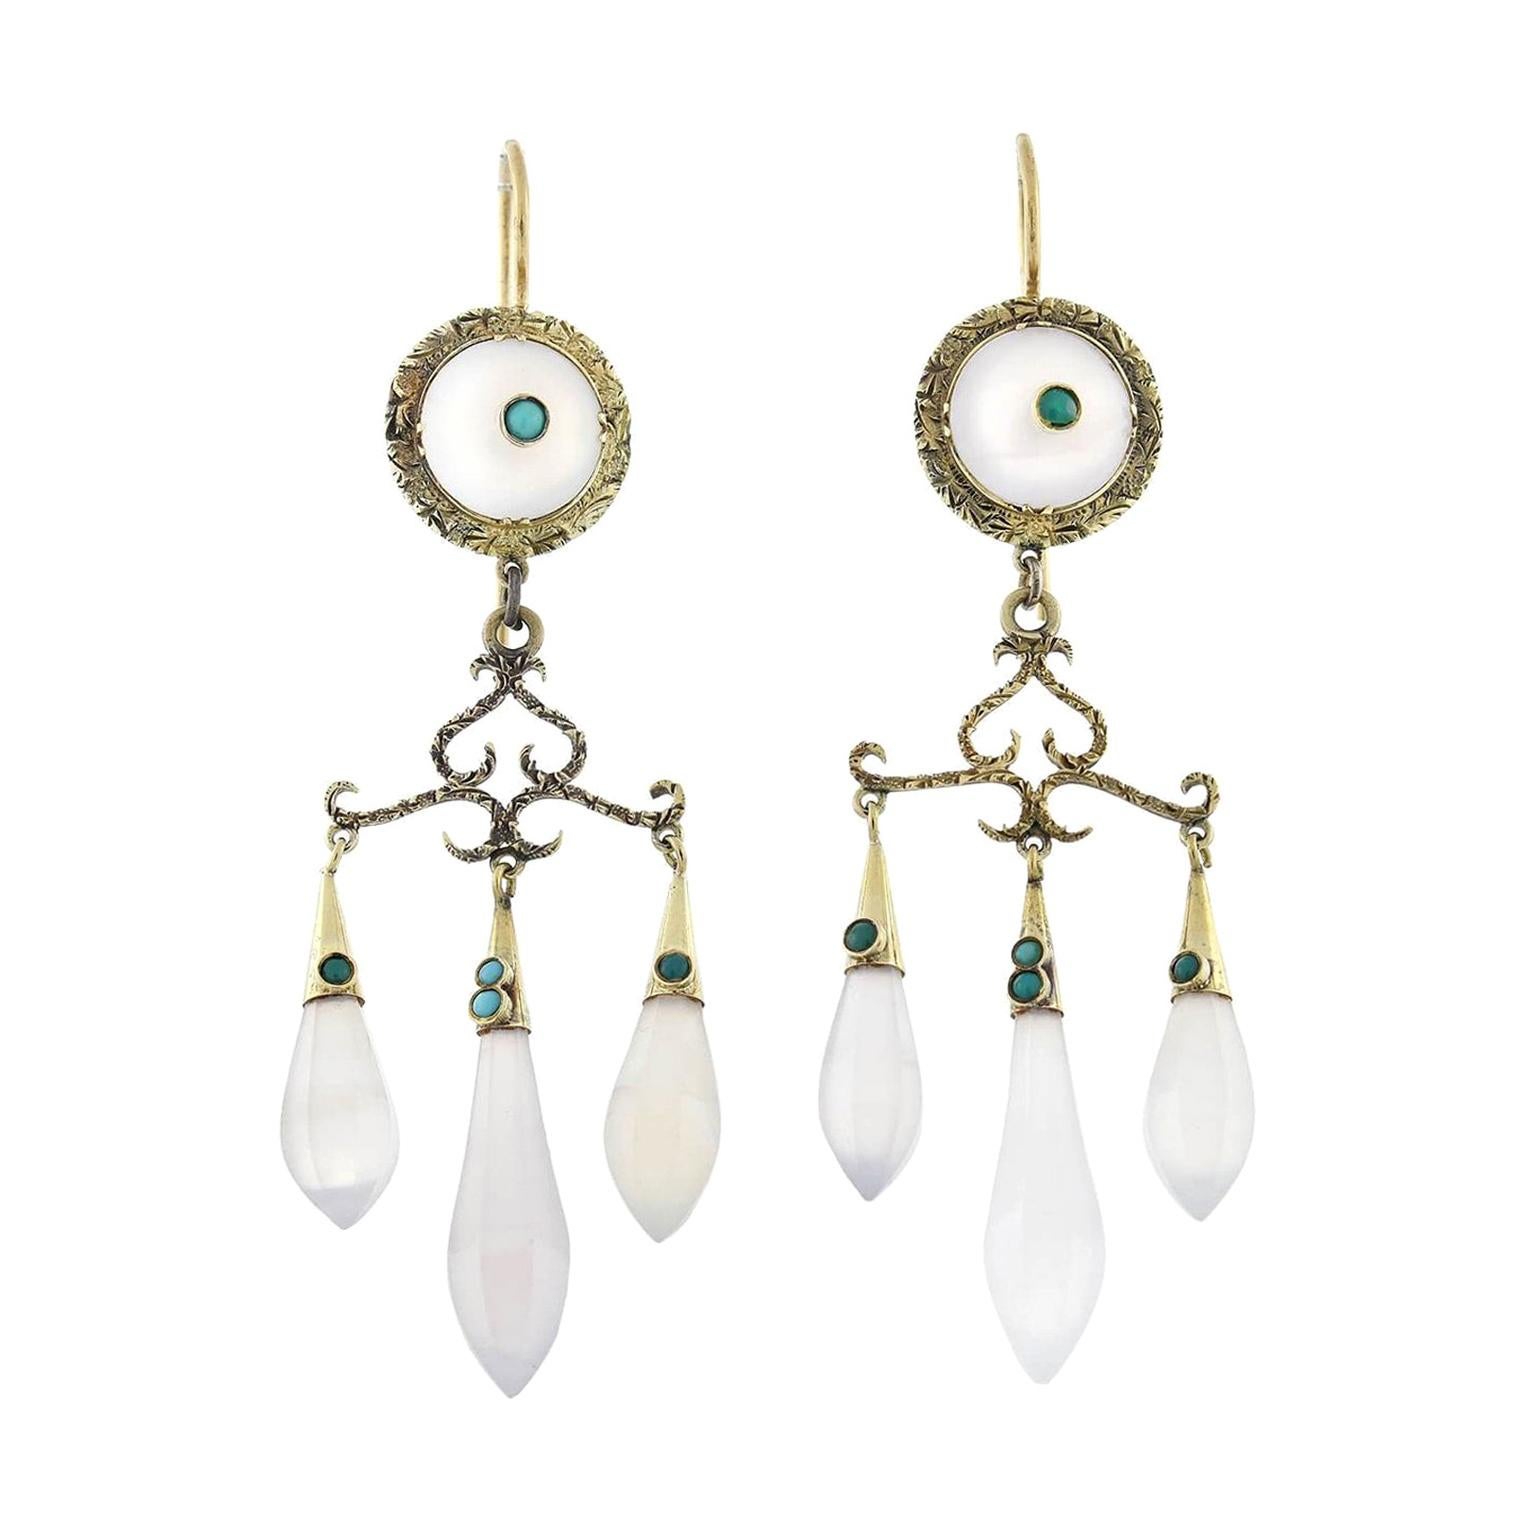 Victorian Carved Chalcedony and Turquoise Chandelier Earrings